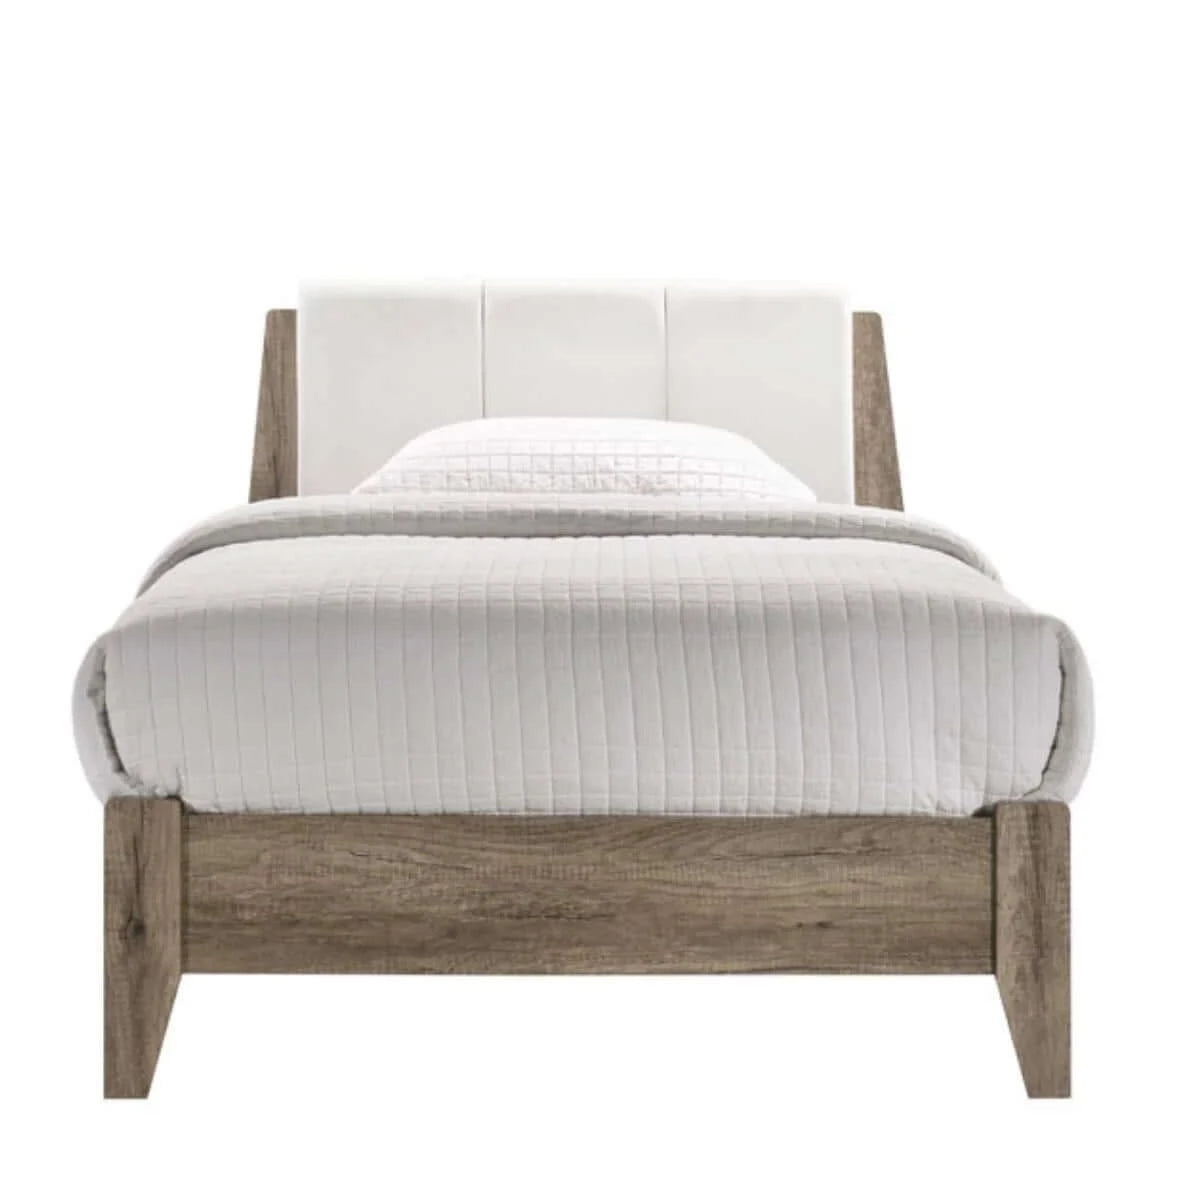 Buy wooden bed frame w leather upholstered bed head queen - upinteriors-Upinteriors